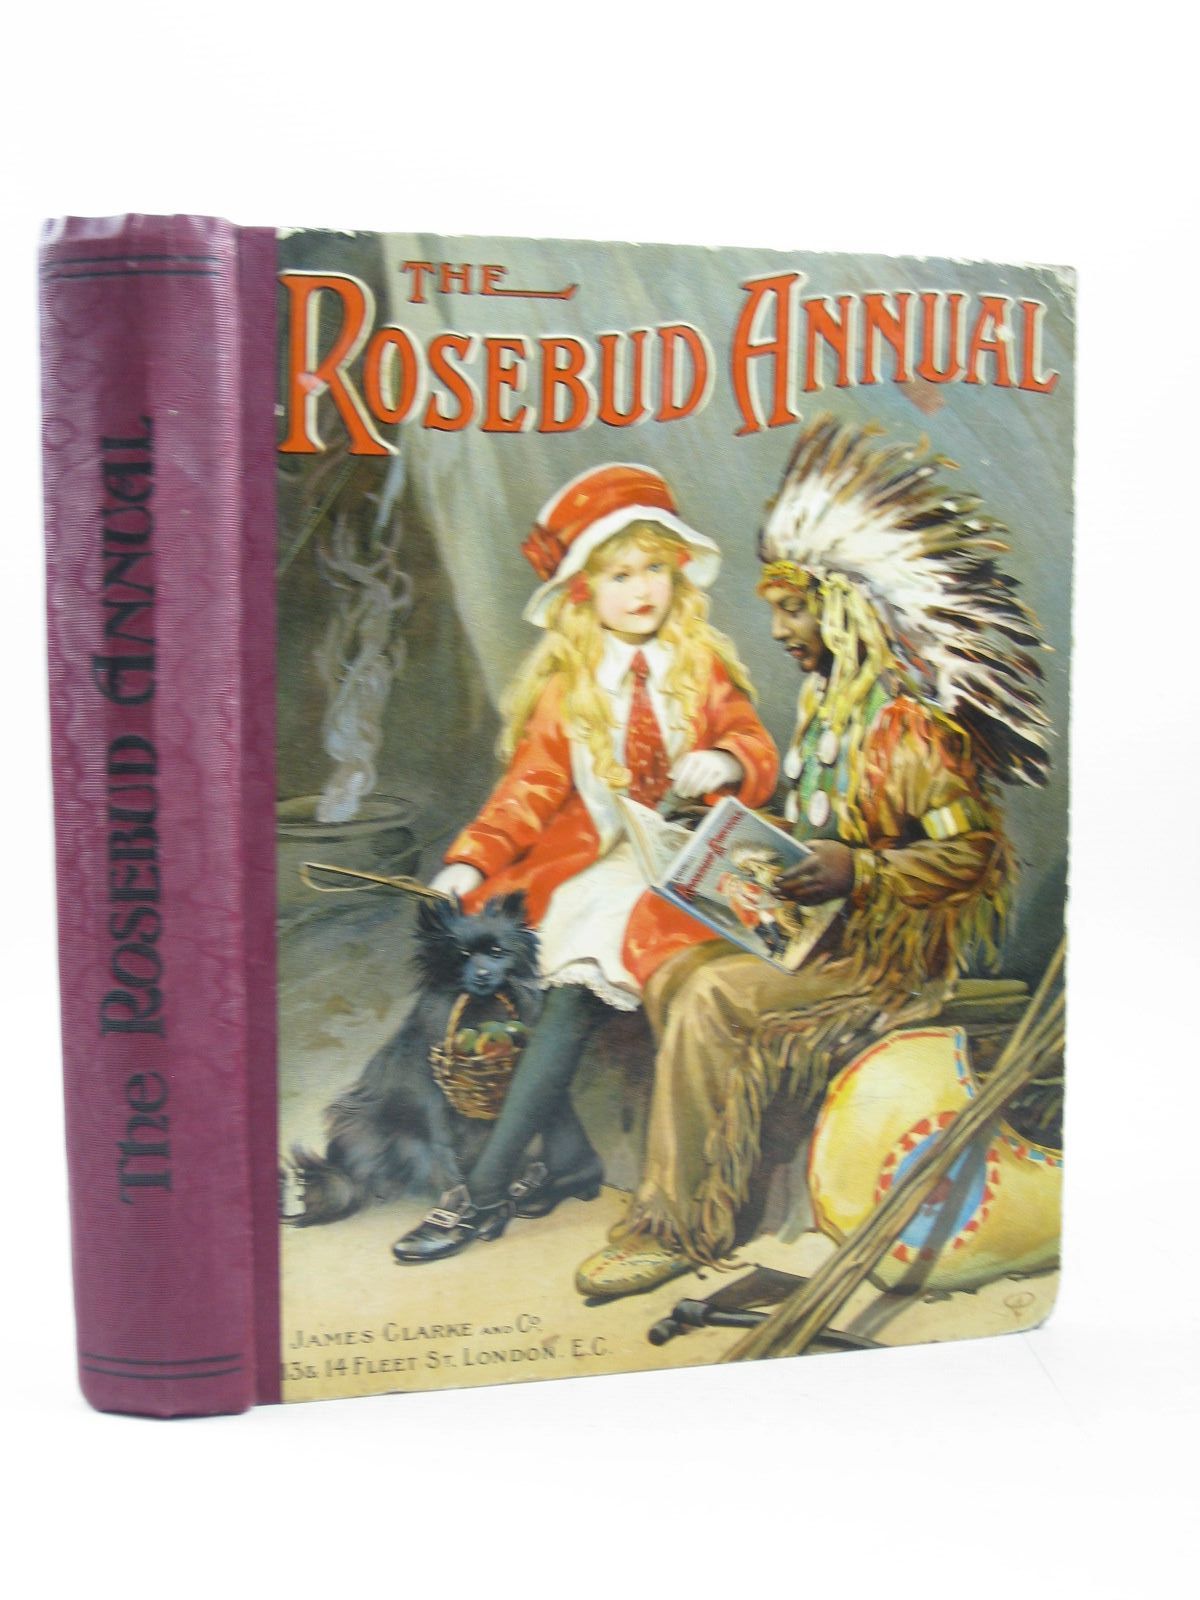 Photo of THE ROSEBUD ANNUAL 1915 written by Blomfield, Elsie Cash, Agness E. et al, illustrated by Wain, Louis Welsh, Lilian et al., published by James Clarke &amp; Co. (STOCK CODE: 1314219)  for sale by Stella & Rose's Books